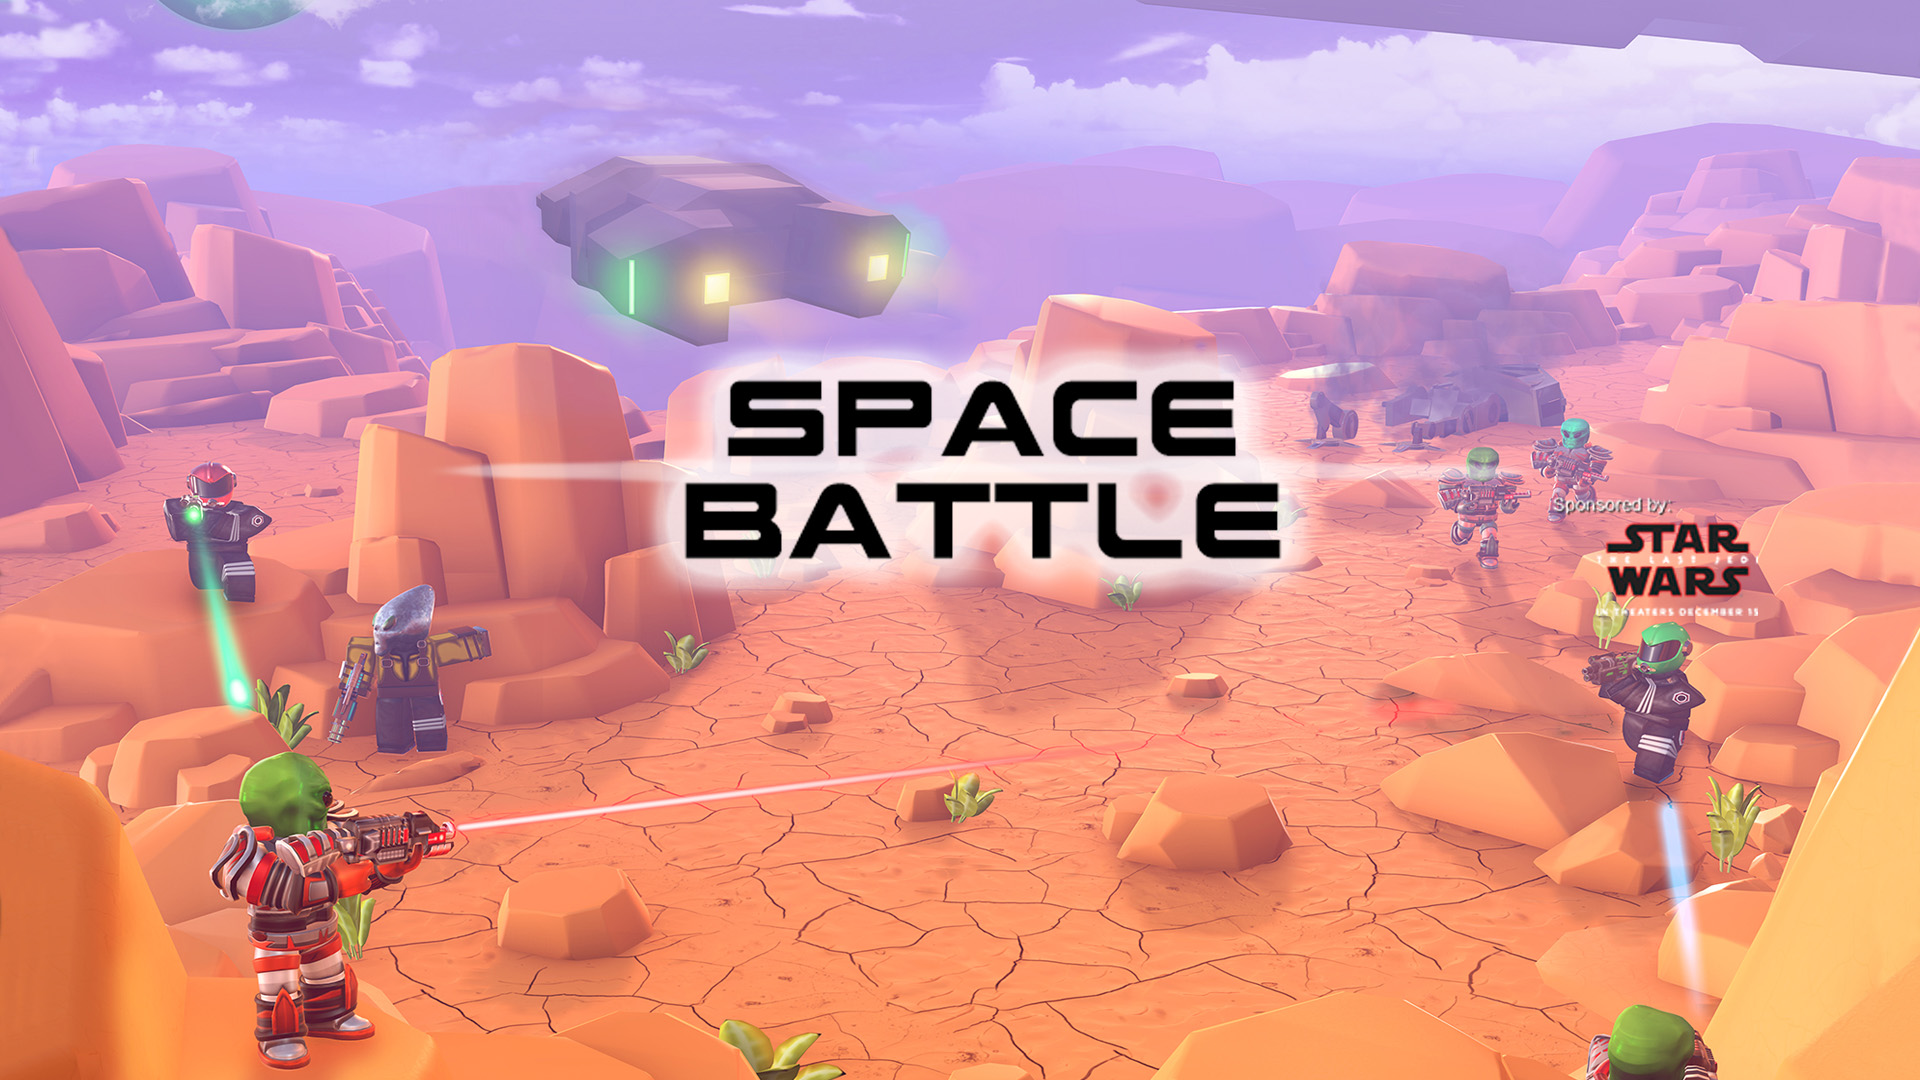 Roblox S Space Battle Event Sponsored By Star Wars The Last Jedi